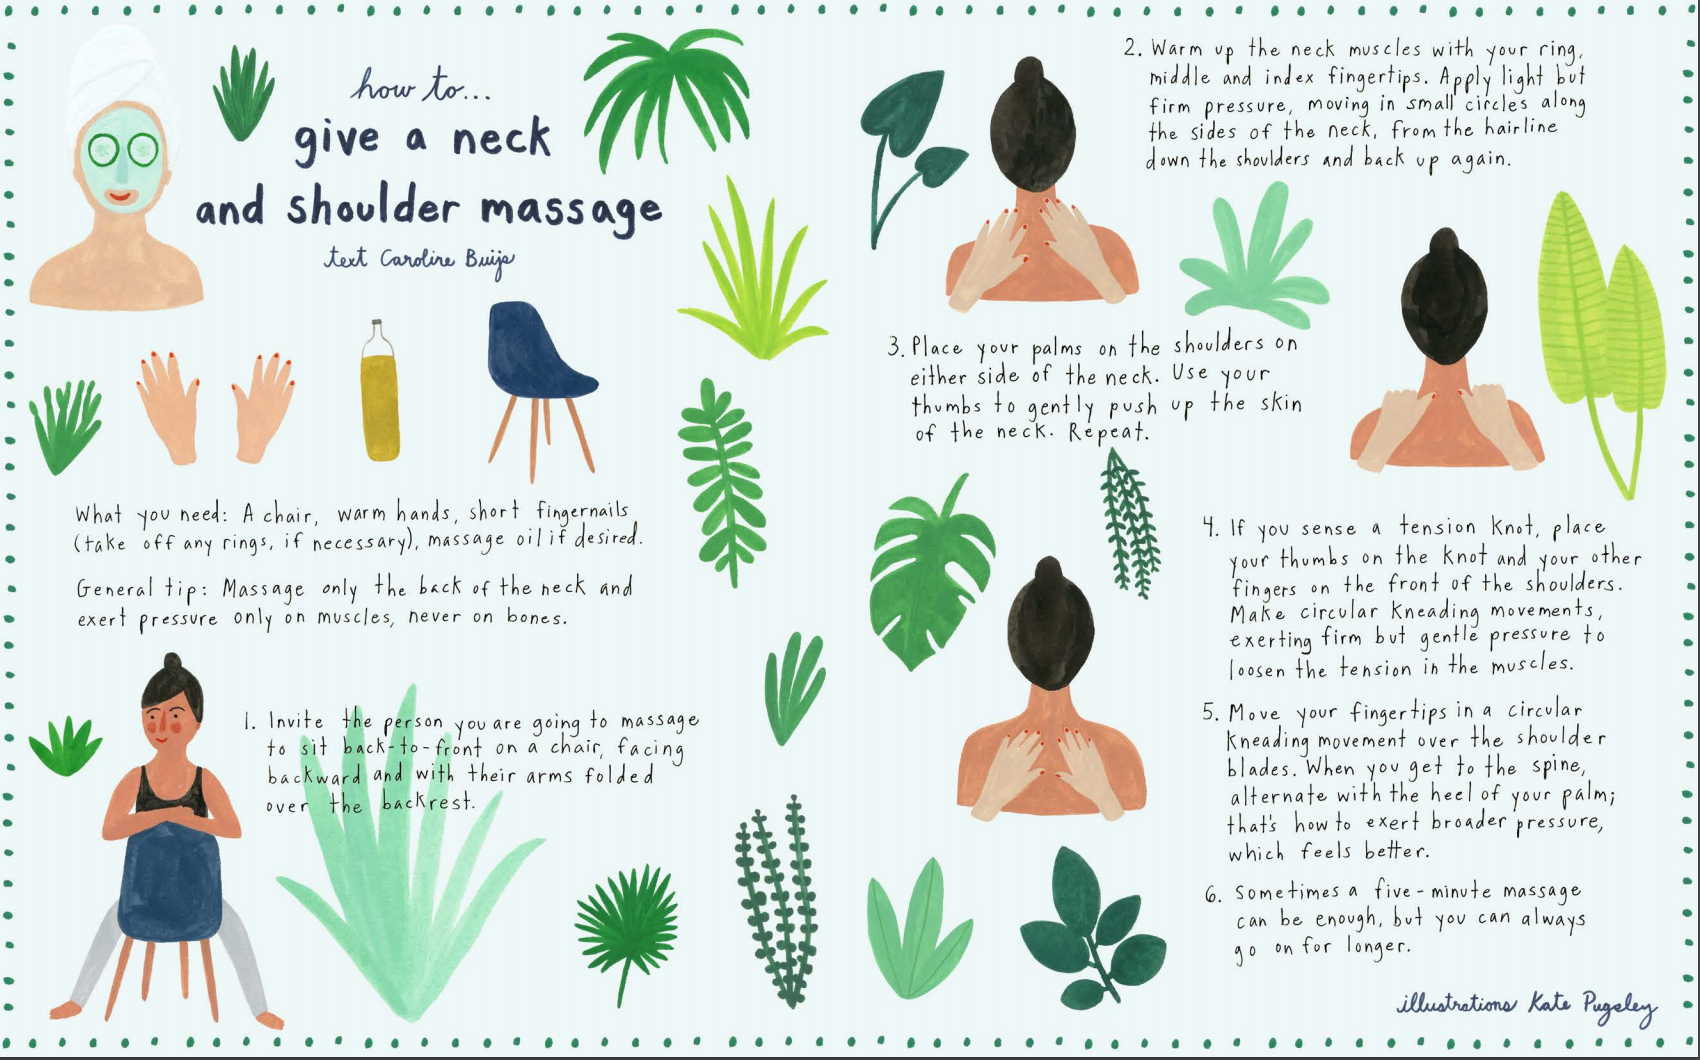 How to give a neck and shoulder massage